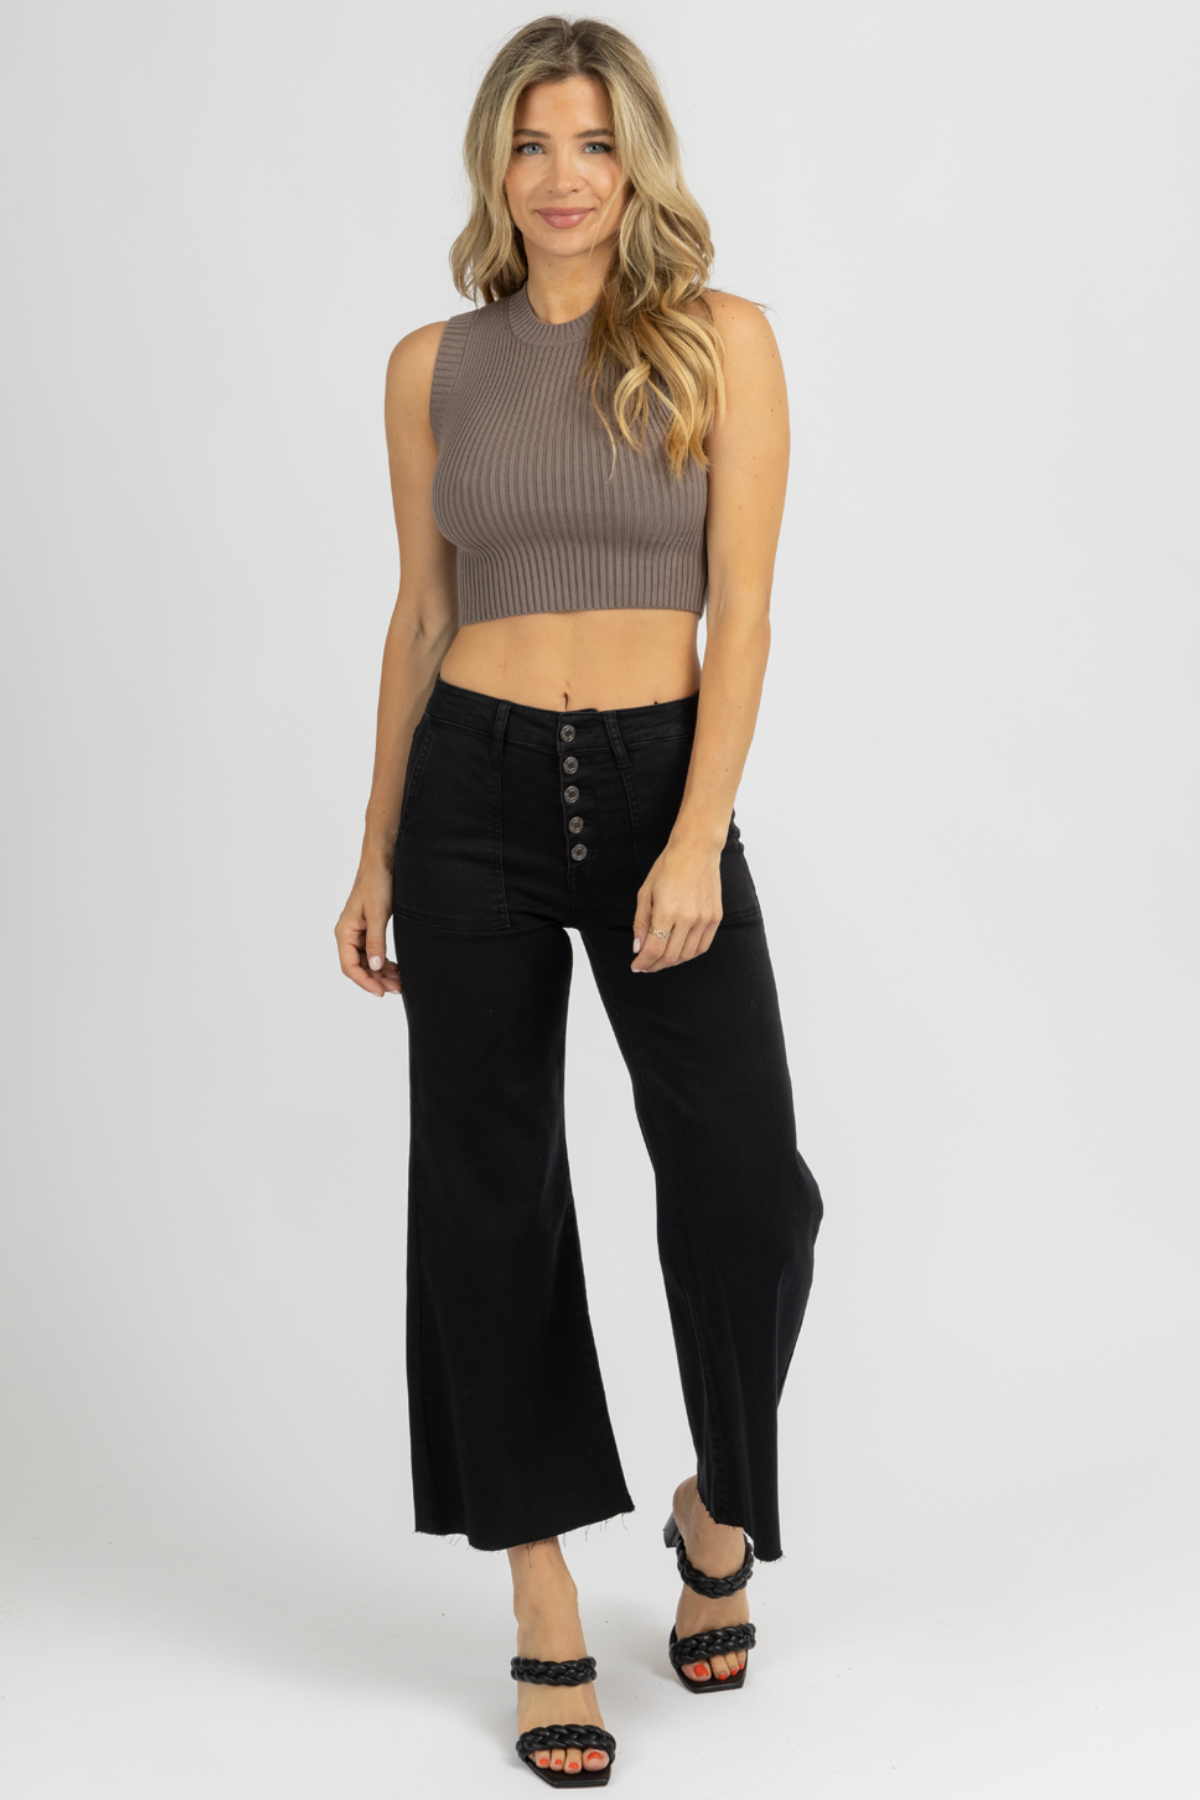 Old Navy Extra HighWaisted Stevie Cropped Flare Pants for Women   Southcentre Mall